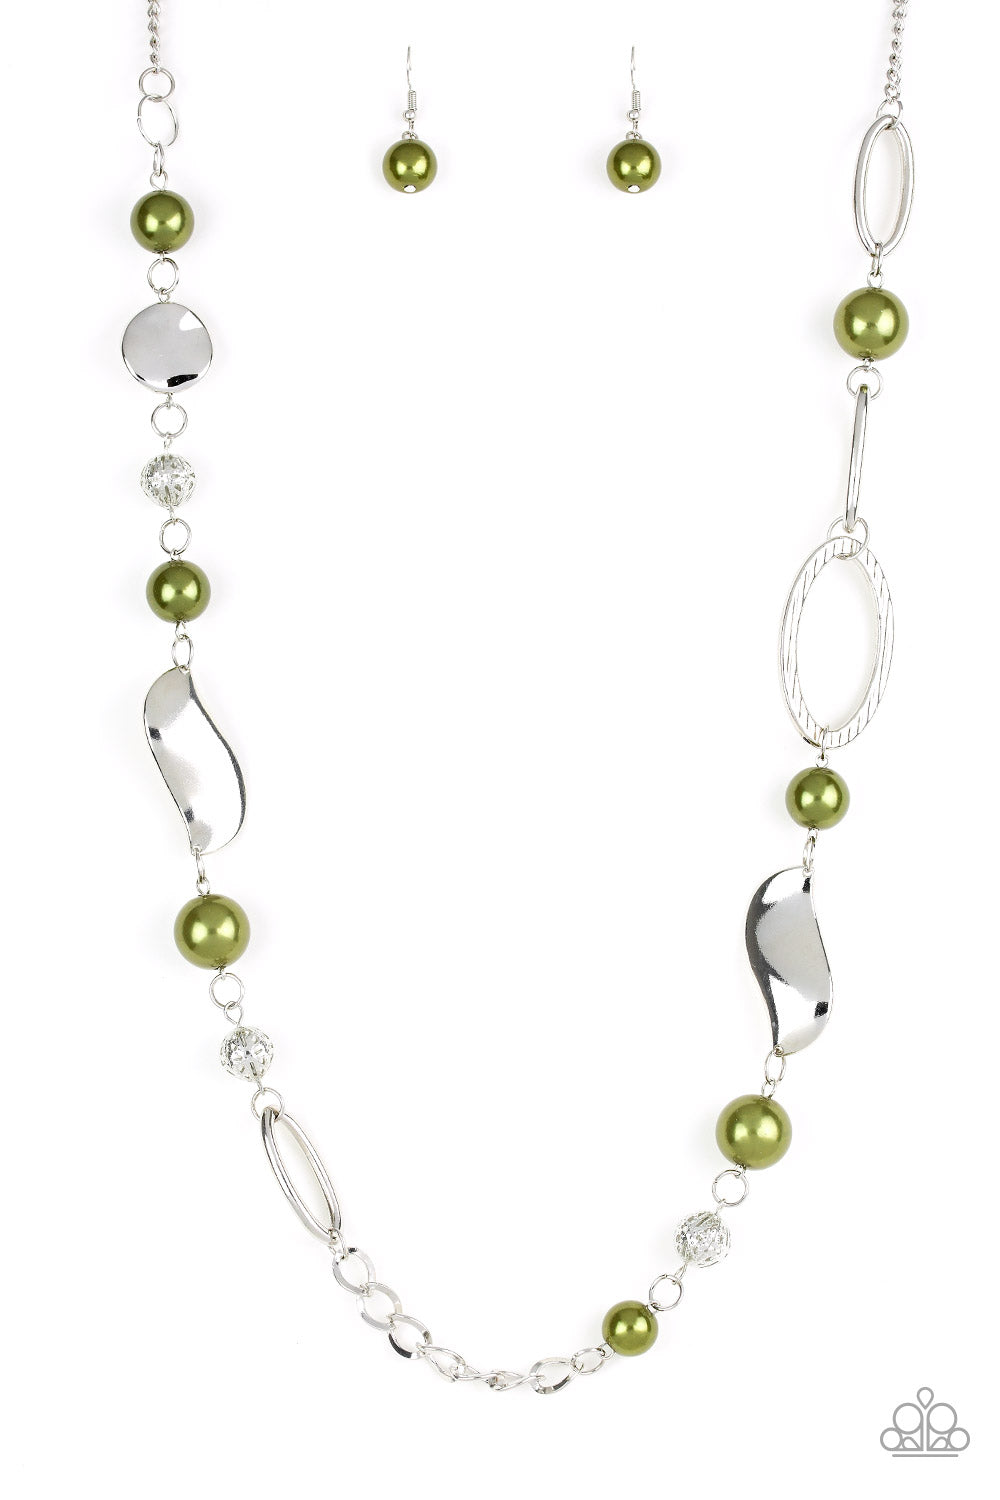 Paparazzi necklace - All About Me - Green